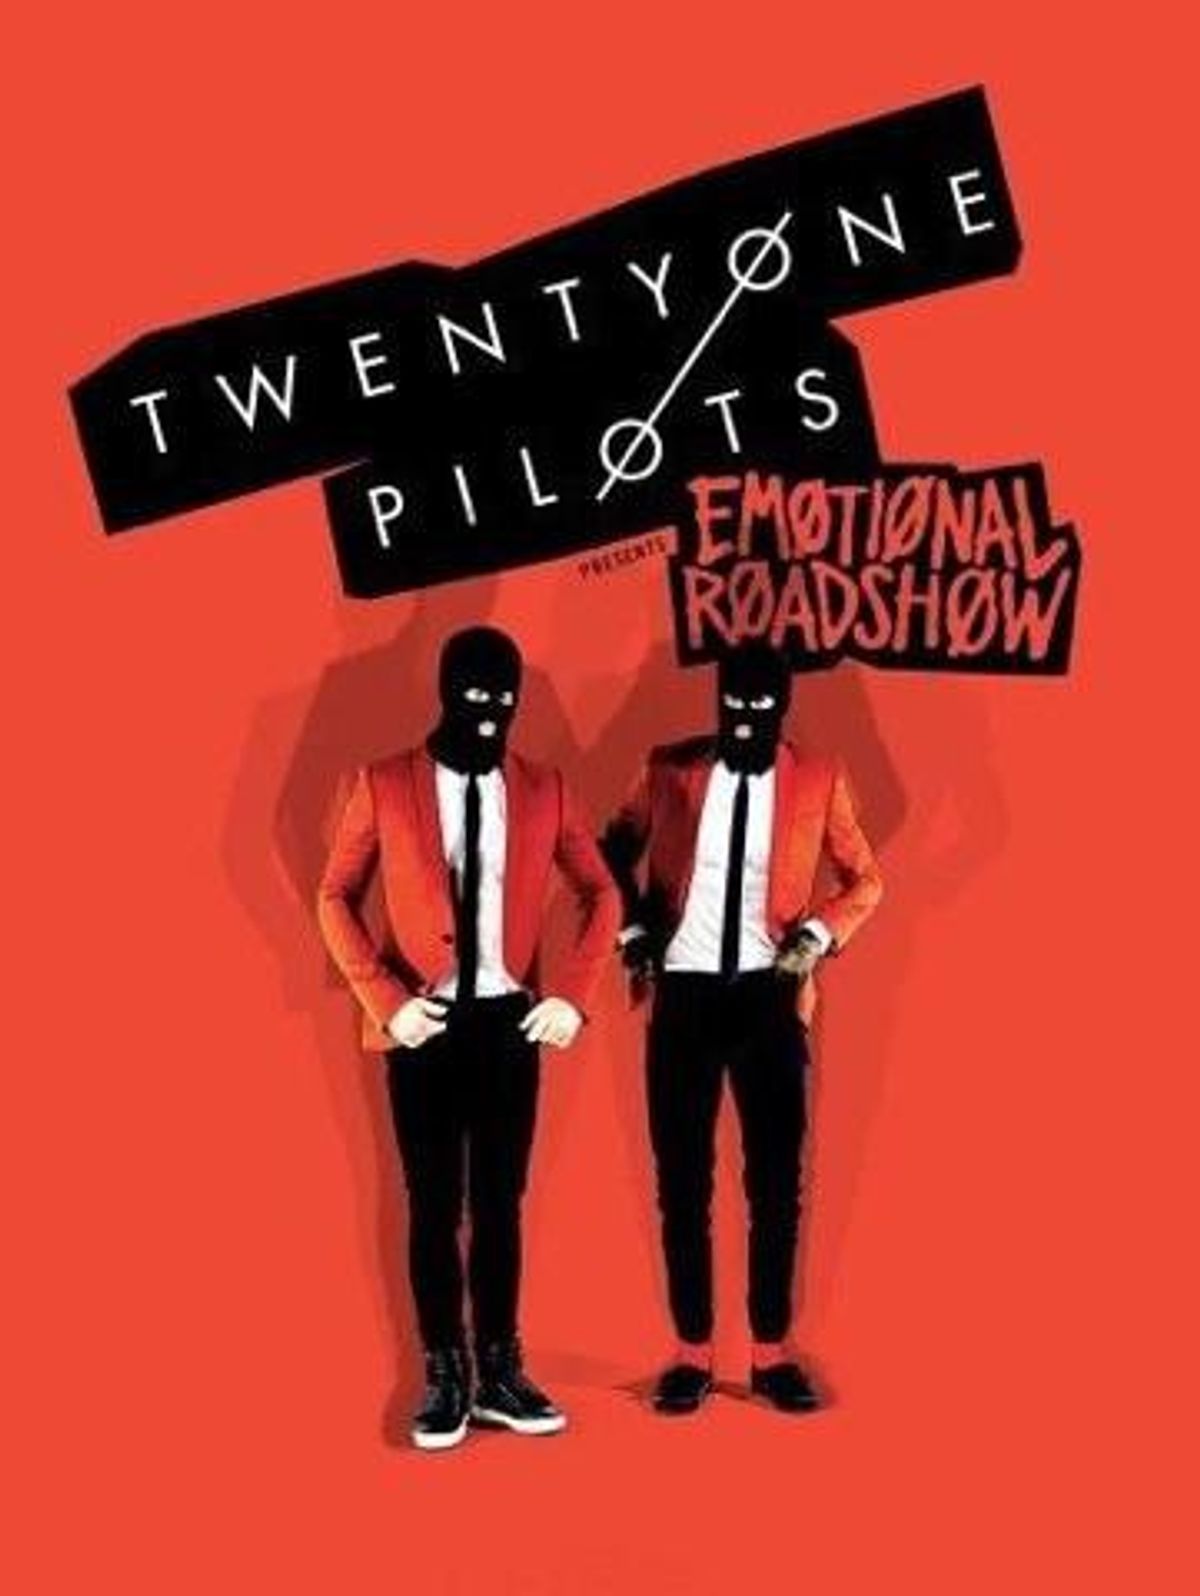 When The Emotional Roadshow Came To Hershey